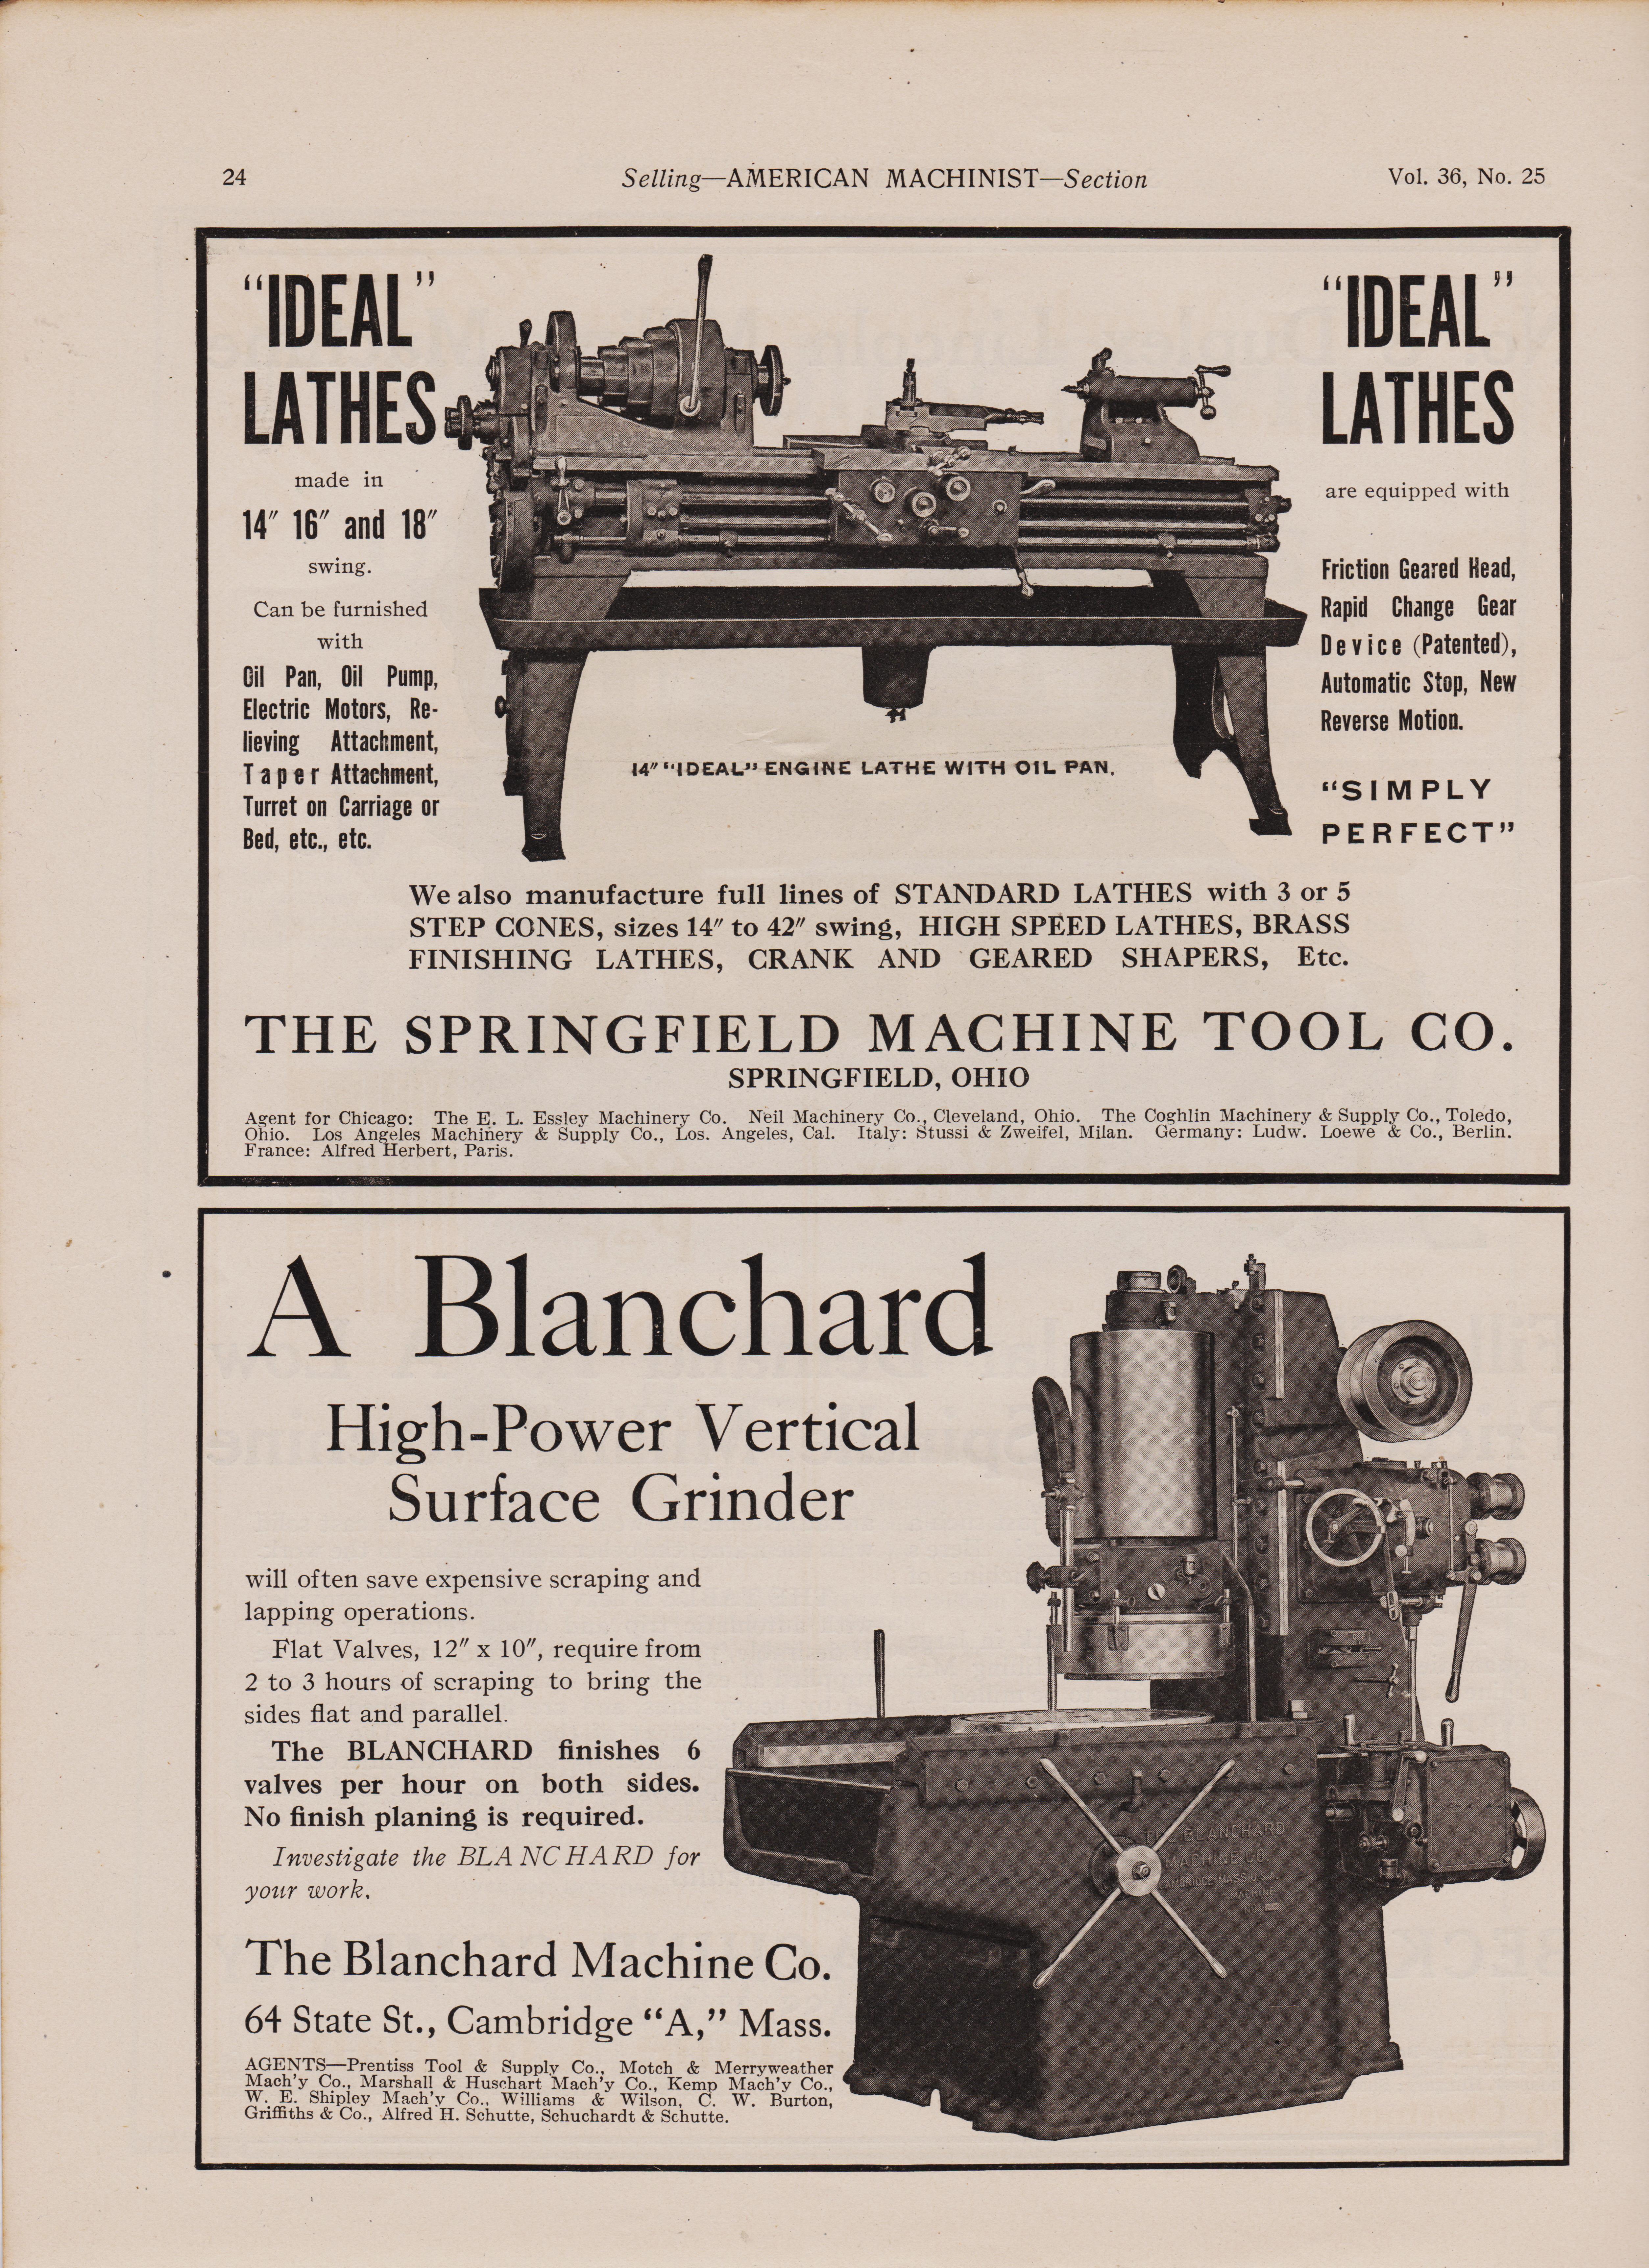 https://antiquemachinery.com/images-2021/1912-American-Machinist-Magazine-1912-June-30-pg-24-Blanchard-machine-Co-Vertical-Surface-Grinder-Verticle-flat-Belt-Drive-Spindle-and-feeds-.jpeg